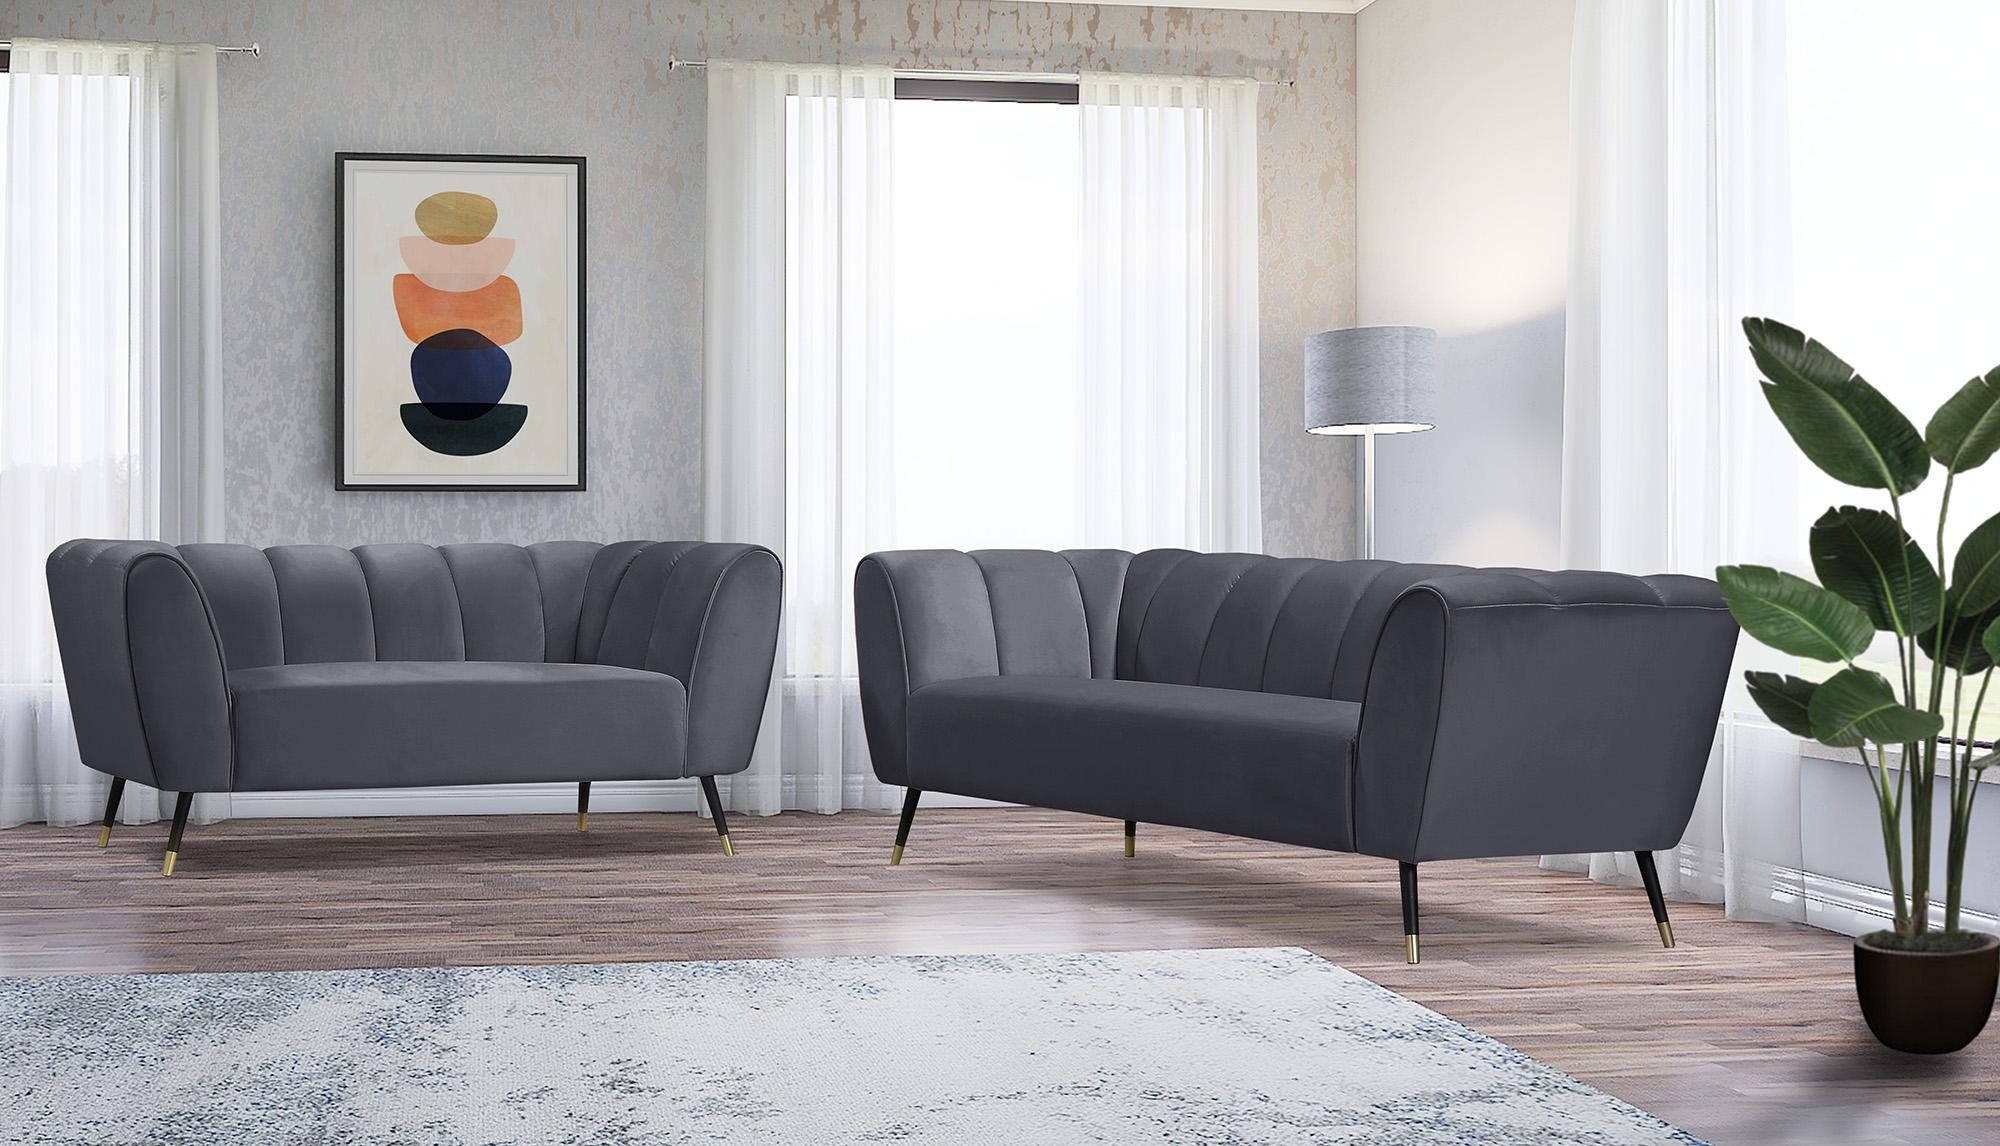 

    
626Grey-L Grey Velvet Channel Tufted Loveseat BEAUMONT 626Grey-L Meridian Contemporary
